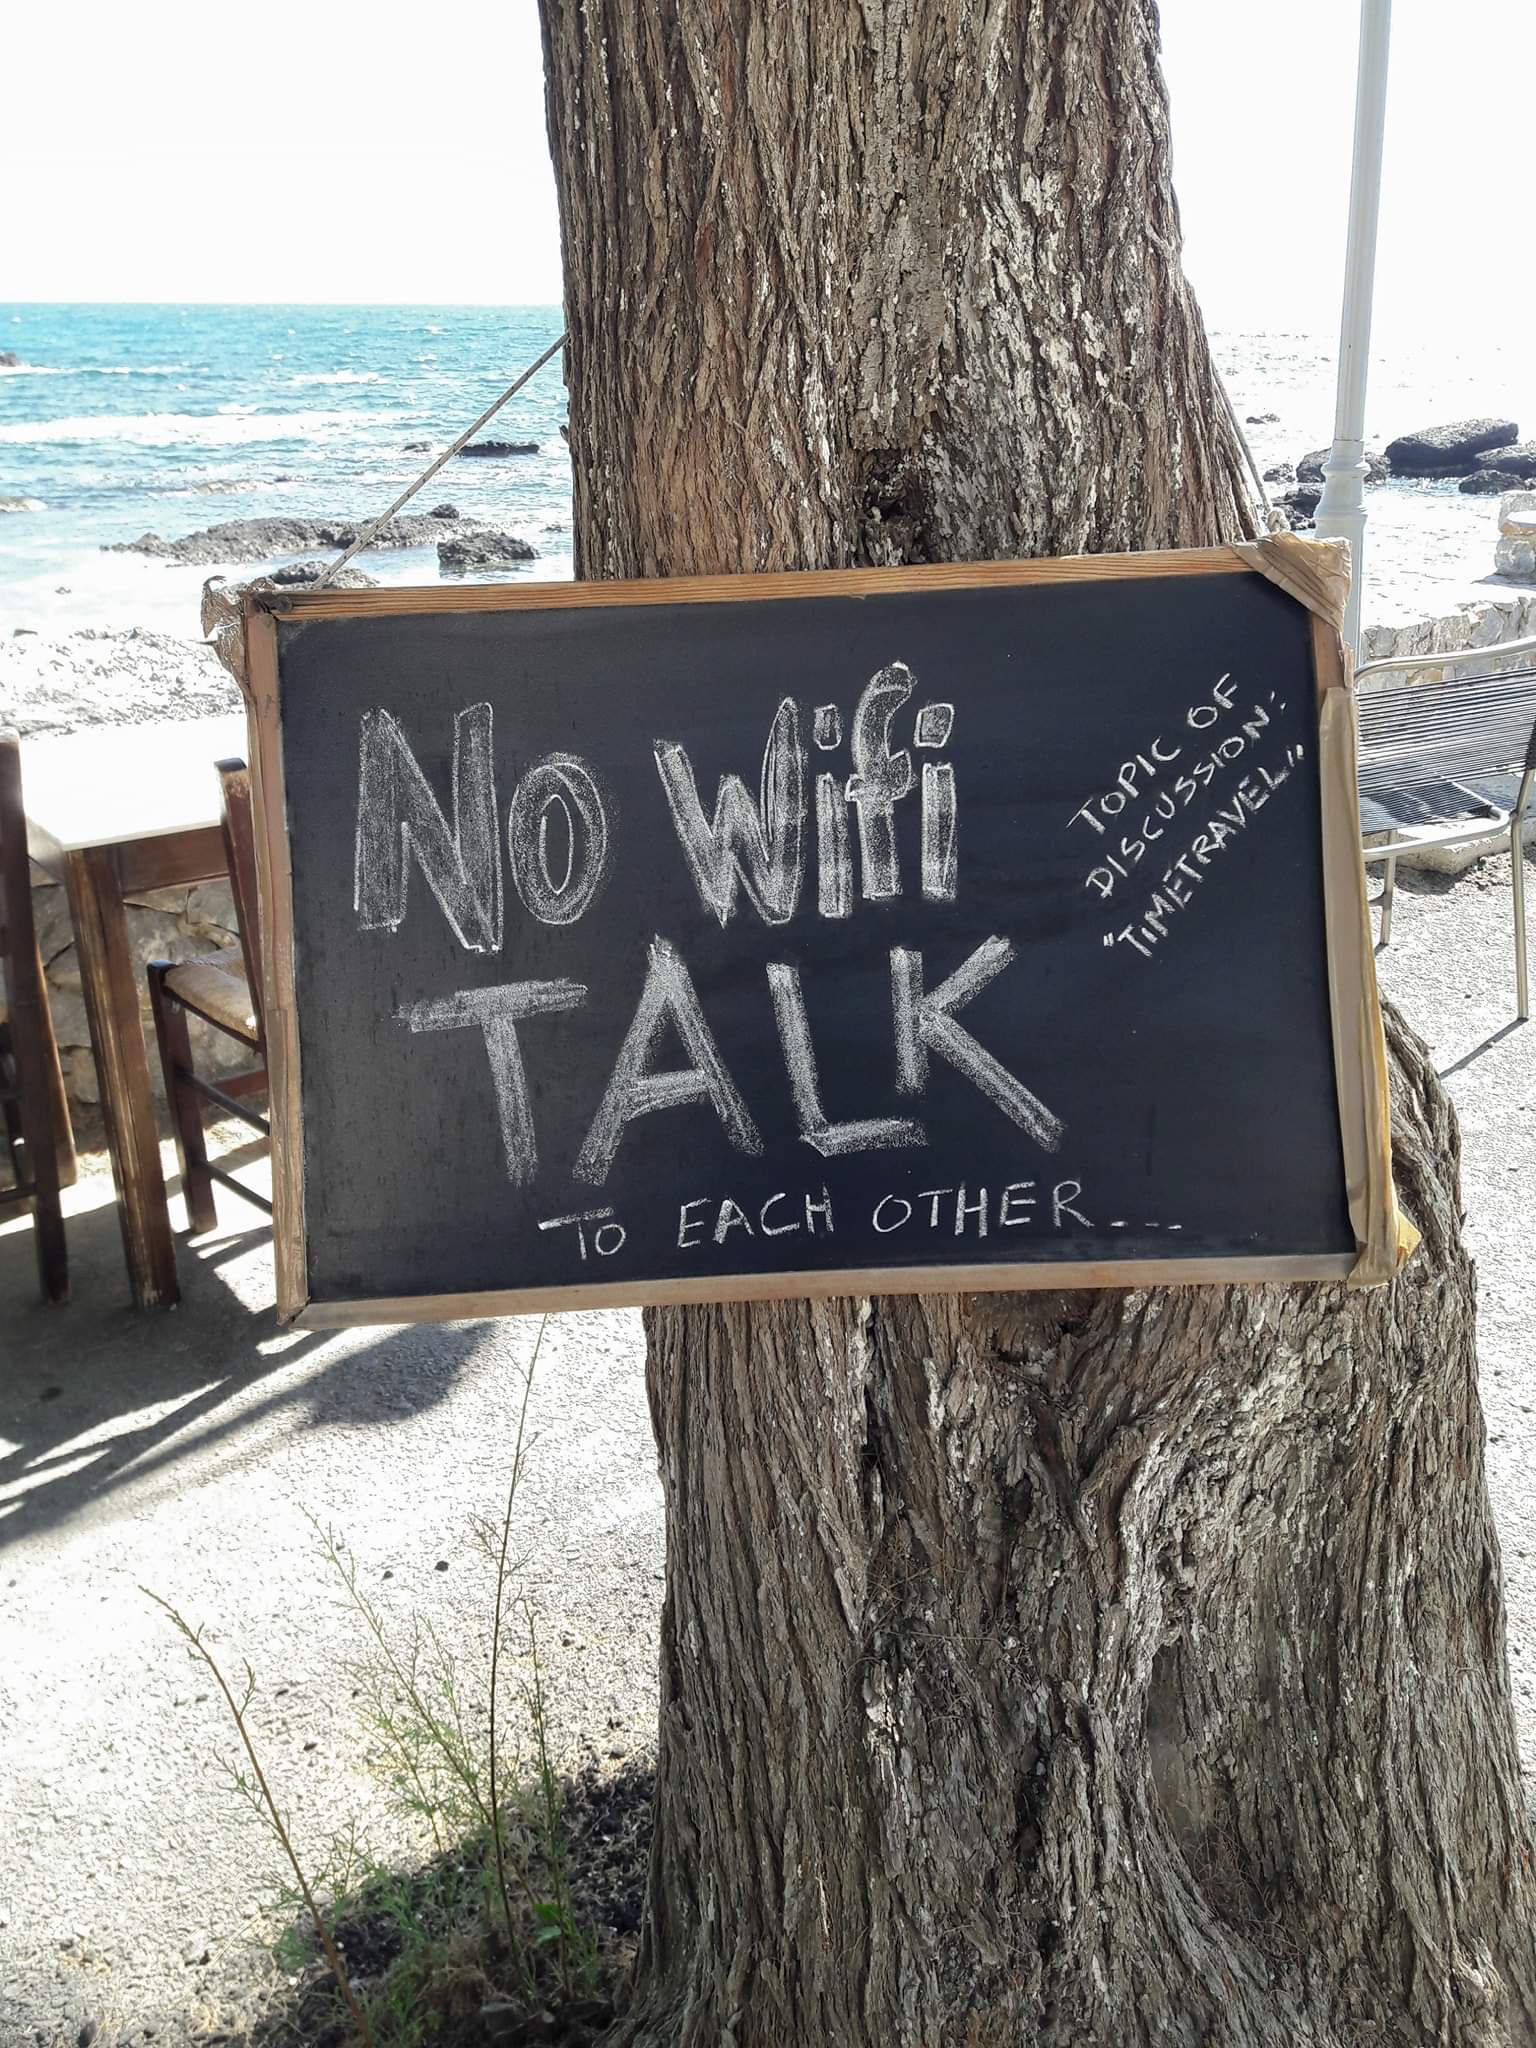 No Wifi. Talk to Each Other.